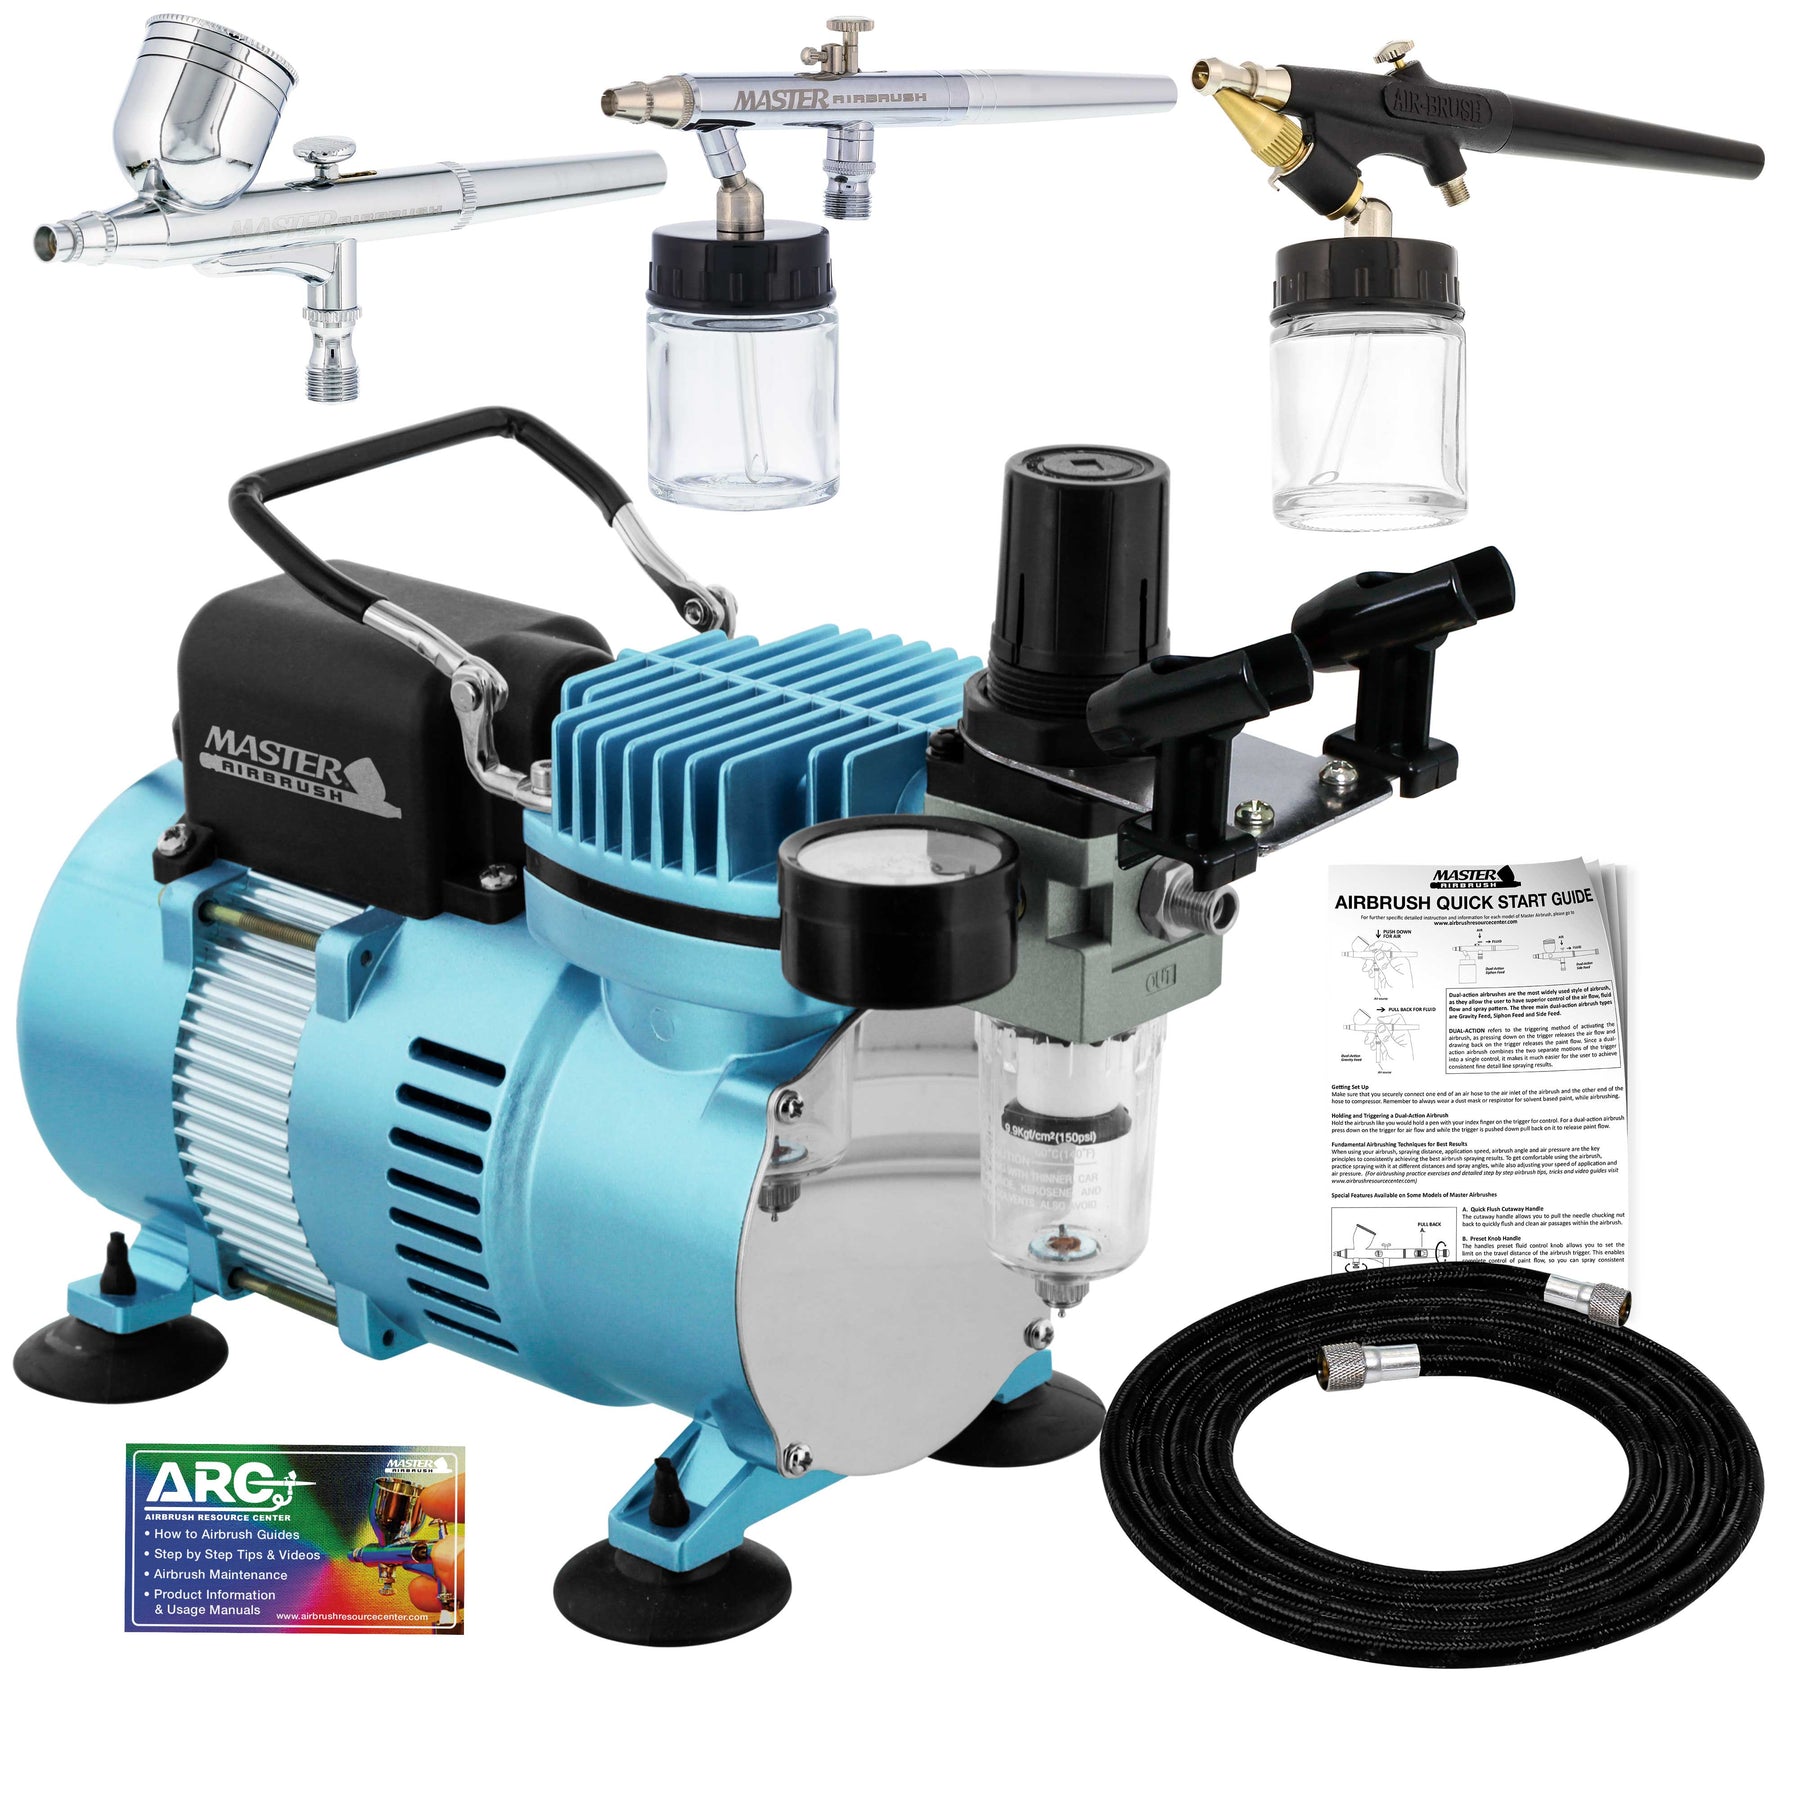 Master Airbrush Cool Runner II Dual Fan Air Compressor Professional Airbrushing System Kit with 3 Airbrush Sets, 0.3 mm Gravity